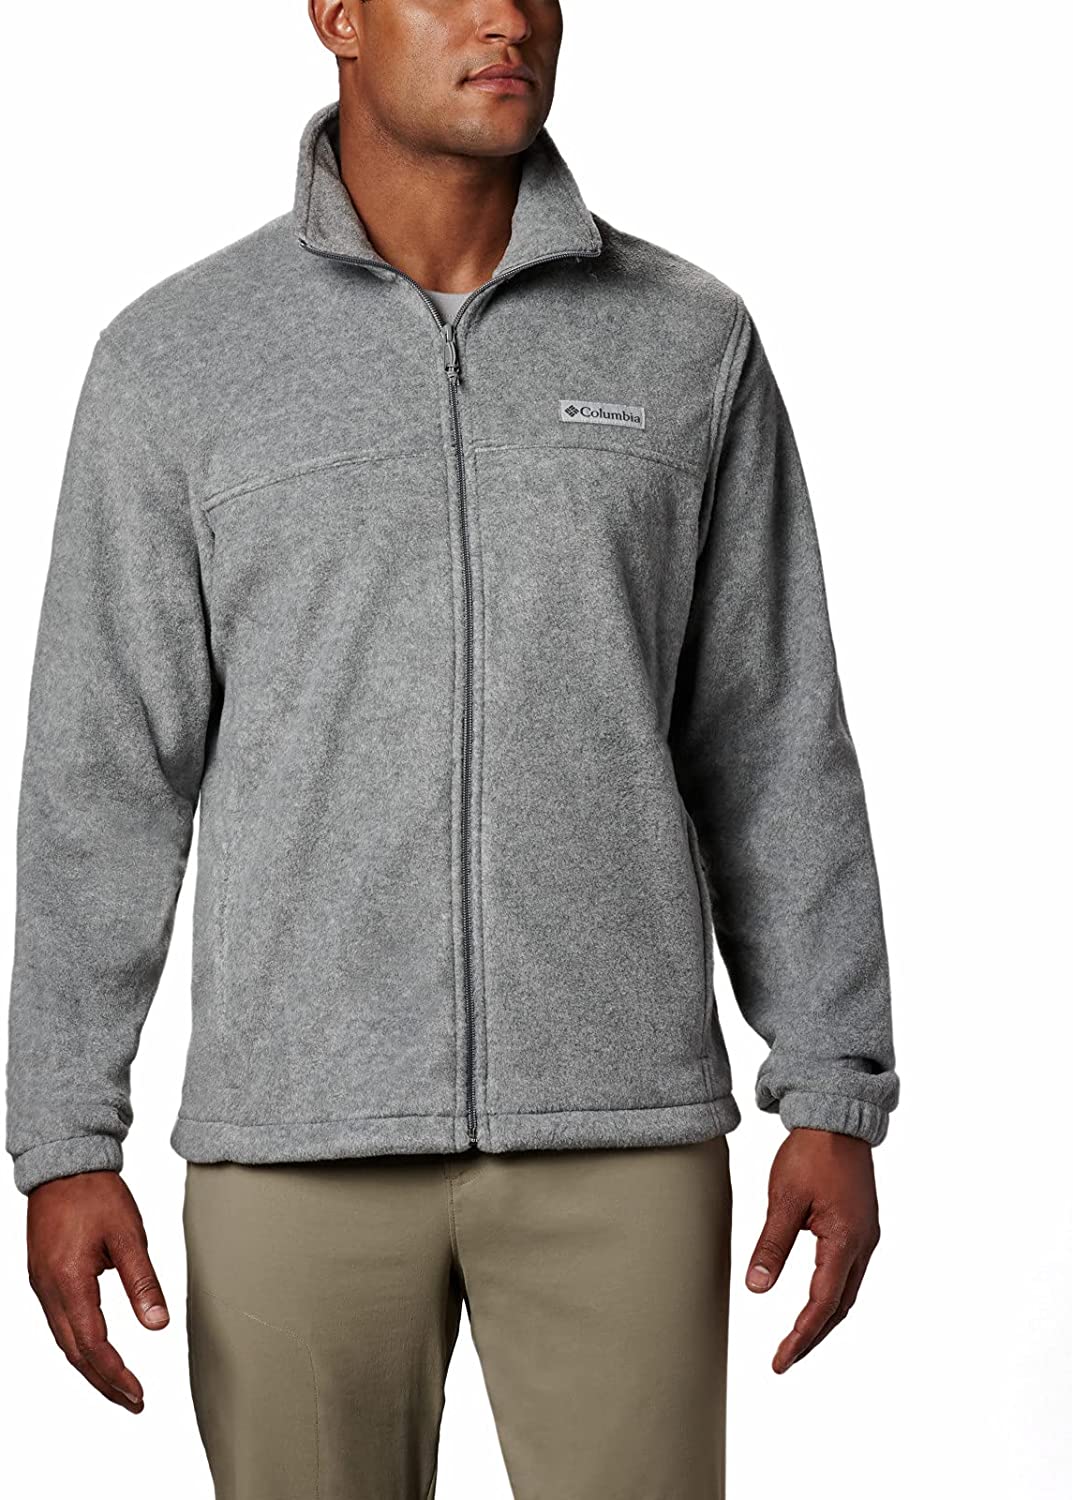 Soft Fleece with Classic Fit Columbia Mens Steens Mountain Full Zip 2.0 